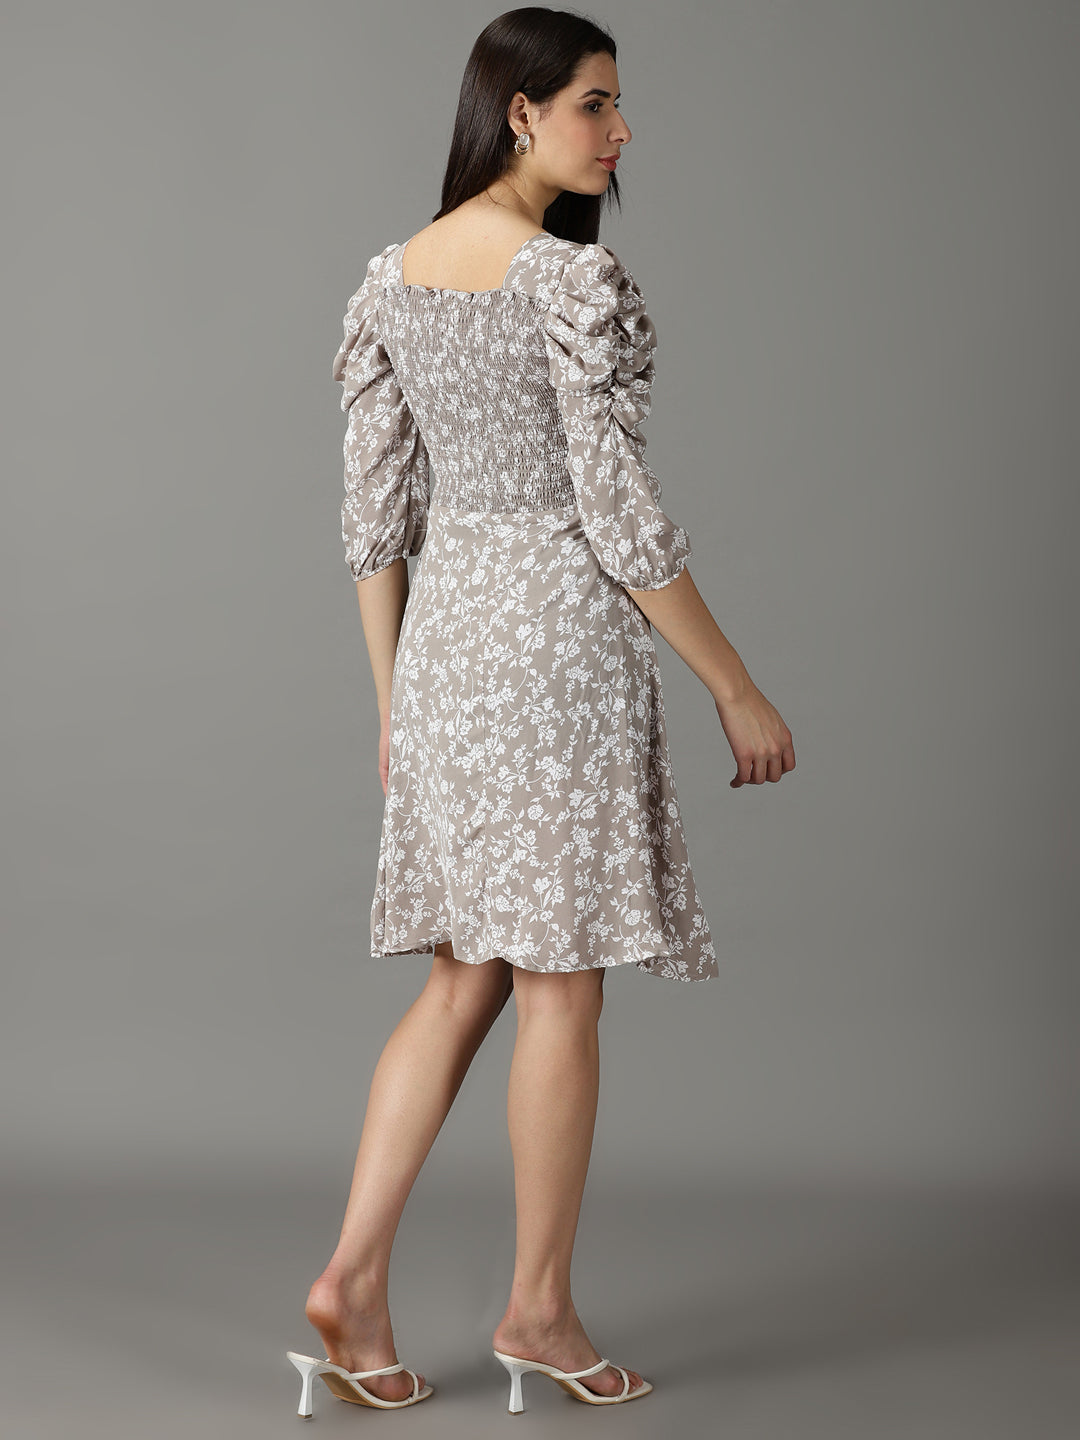 Women's Taupe Printed Fit and Flare Dress